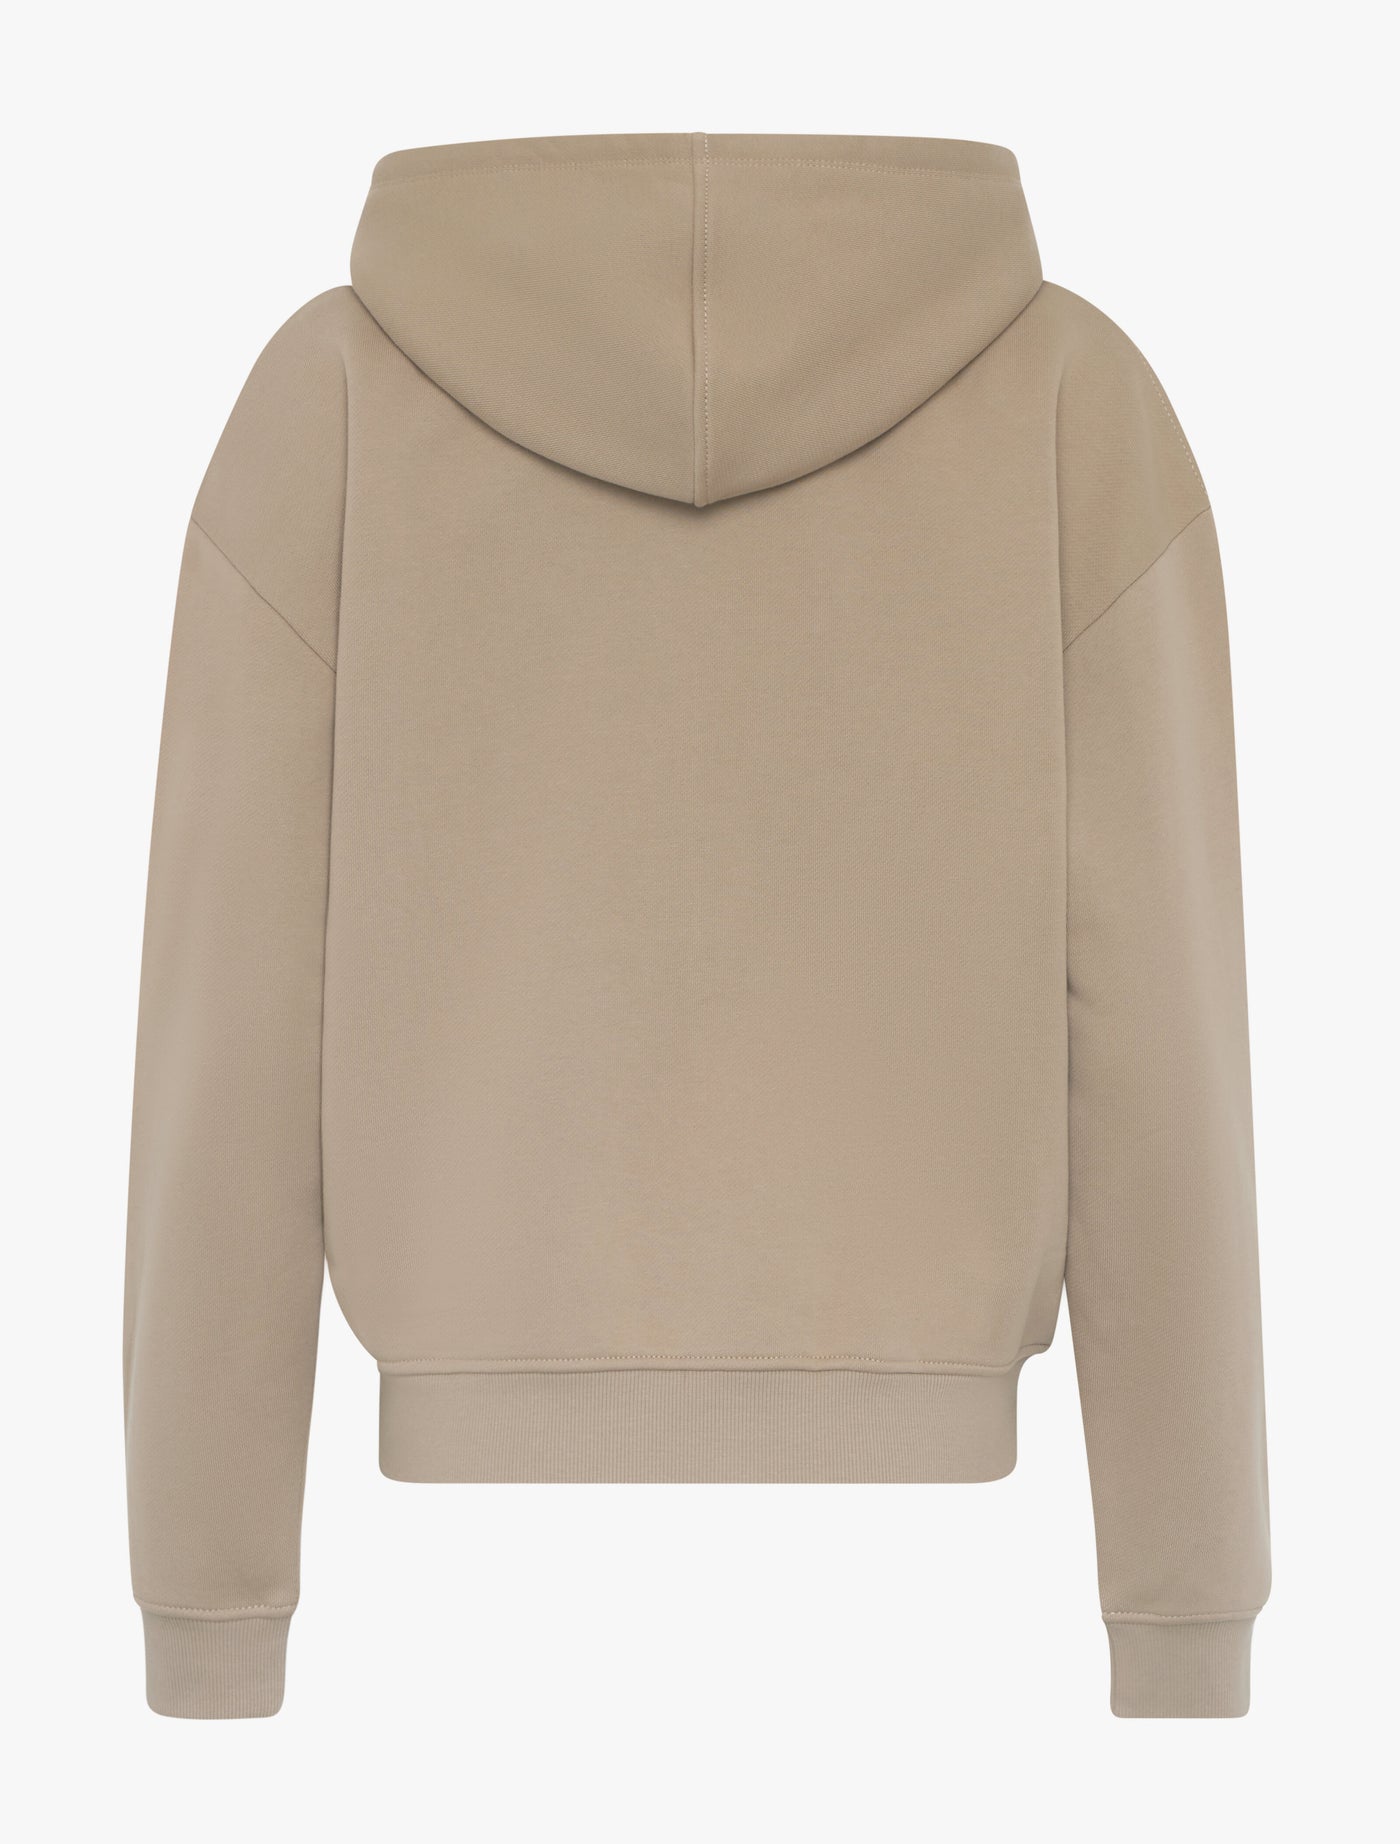 Signature Zip Up Hoodie in Taupe